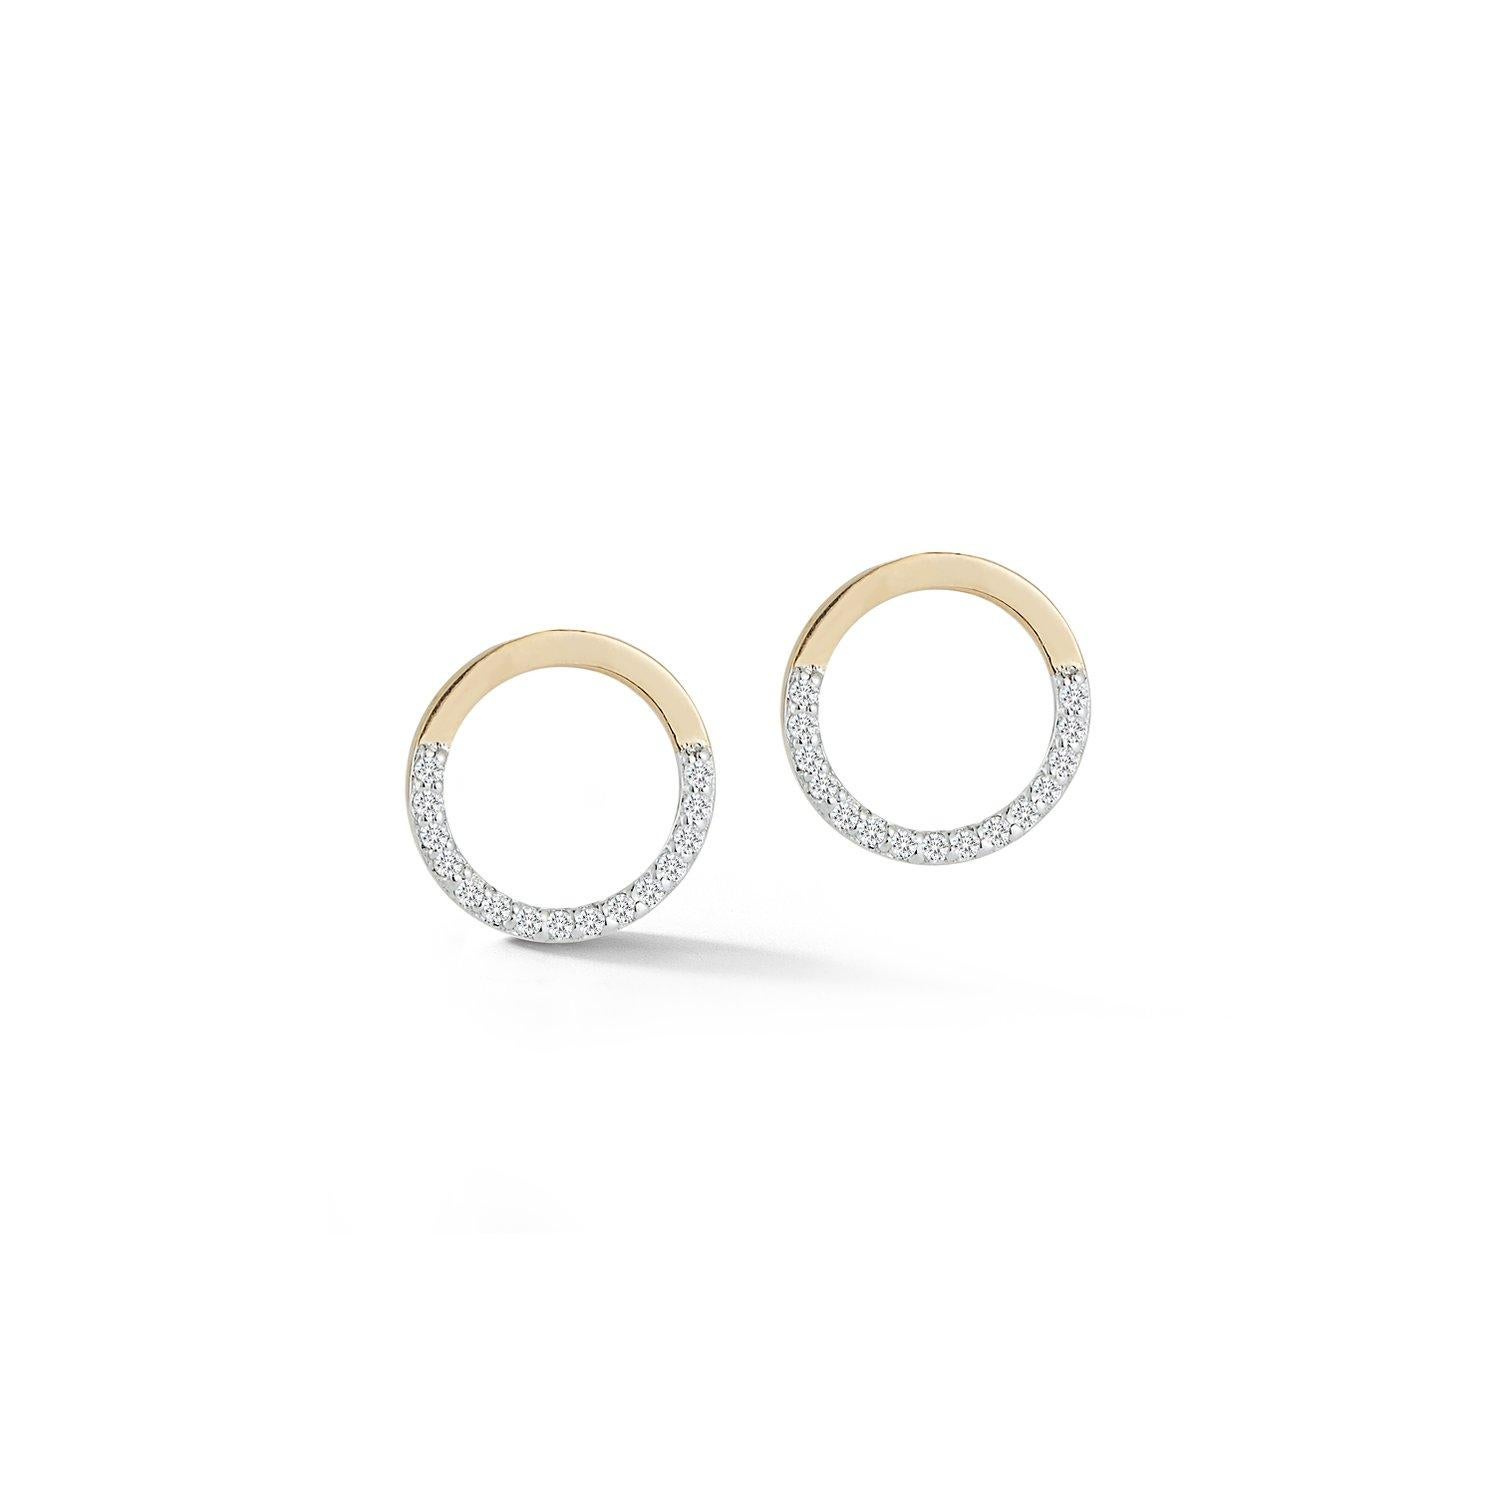  These simple and timeless front facing hoops are the perfect everyday hoops. 